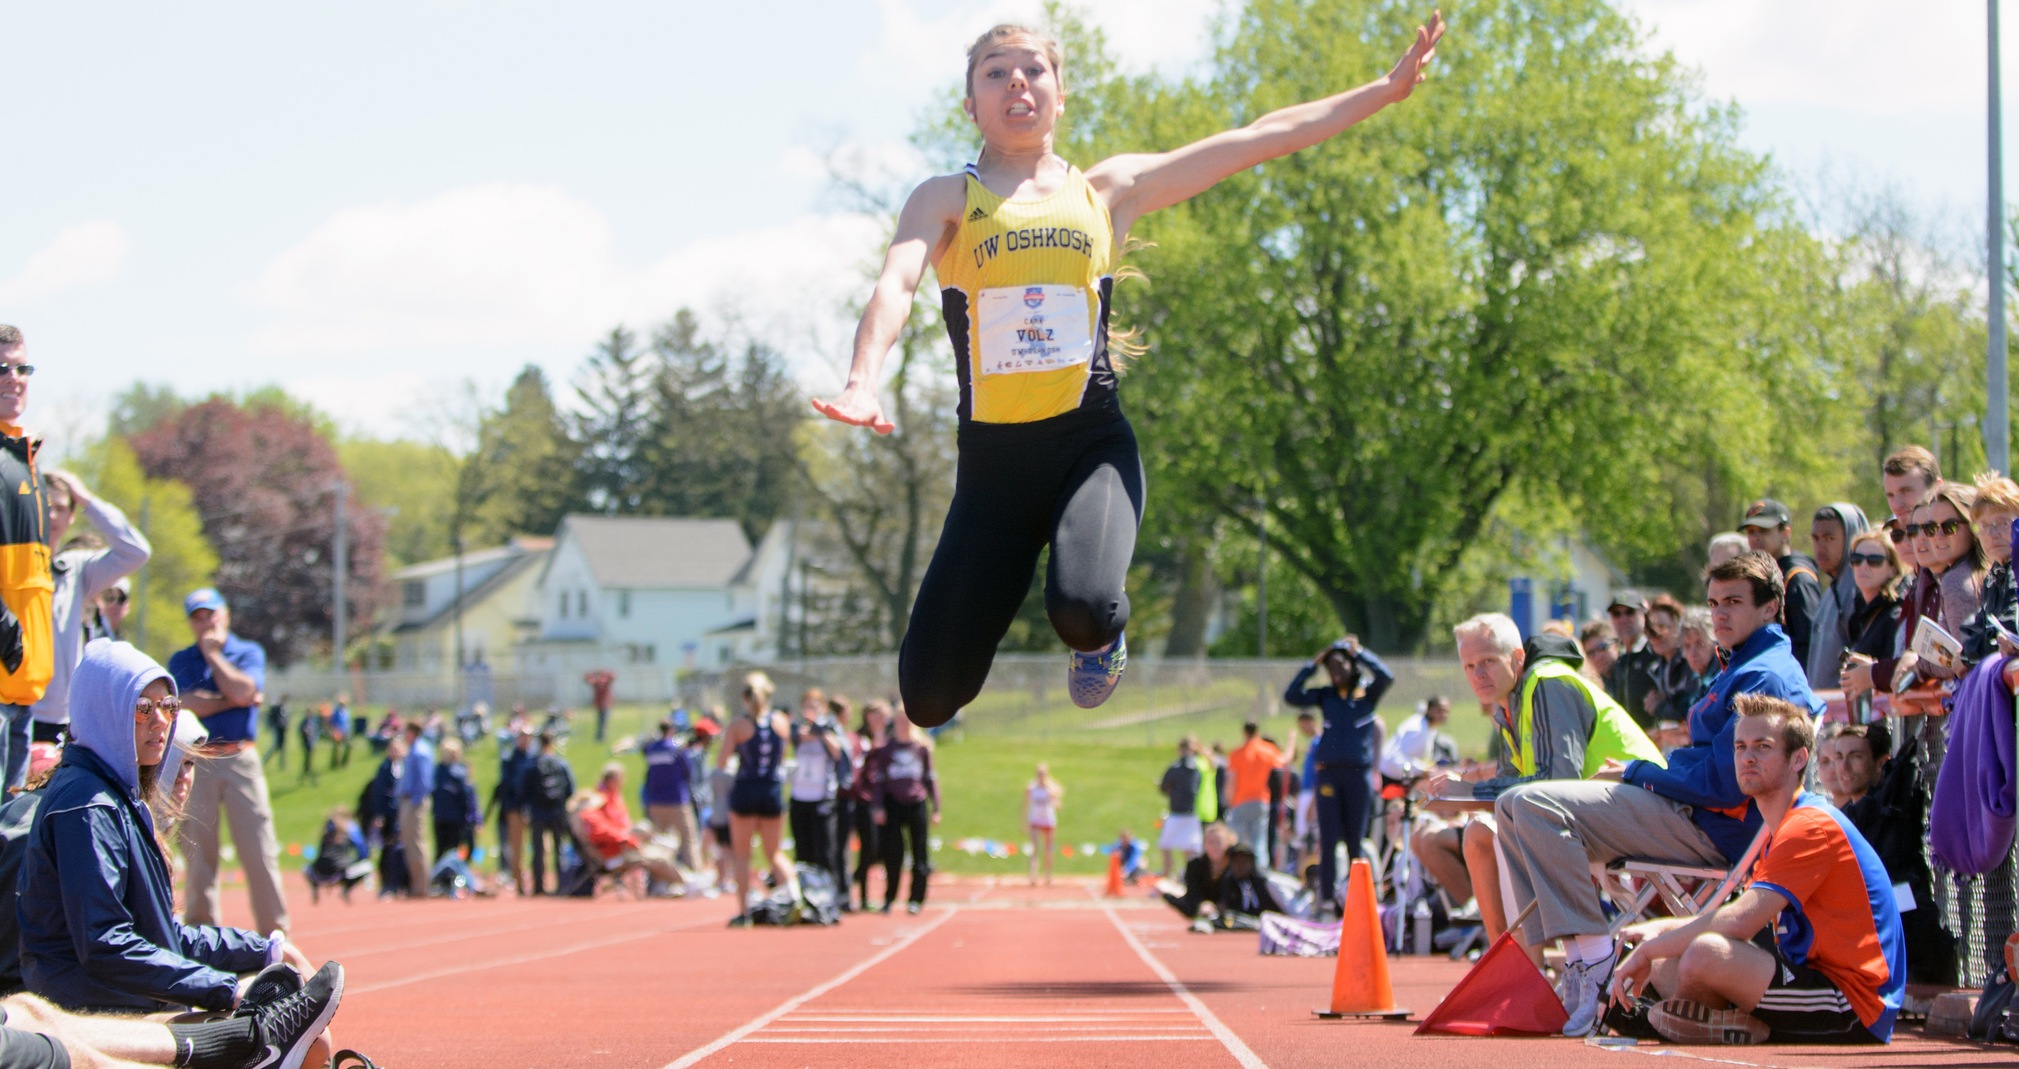 Cara Volz won both the 100-meter hurdles and triple jump competition at the Benedictine University Invitational.